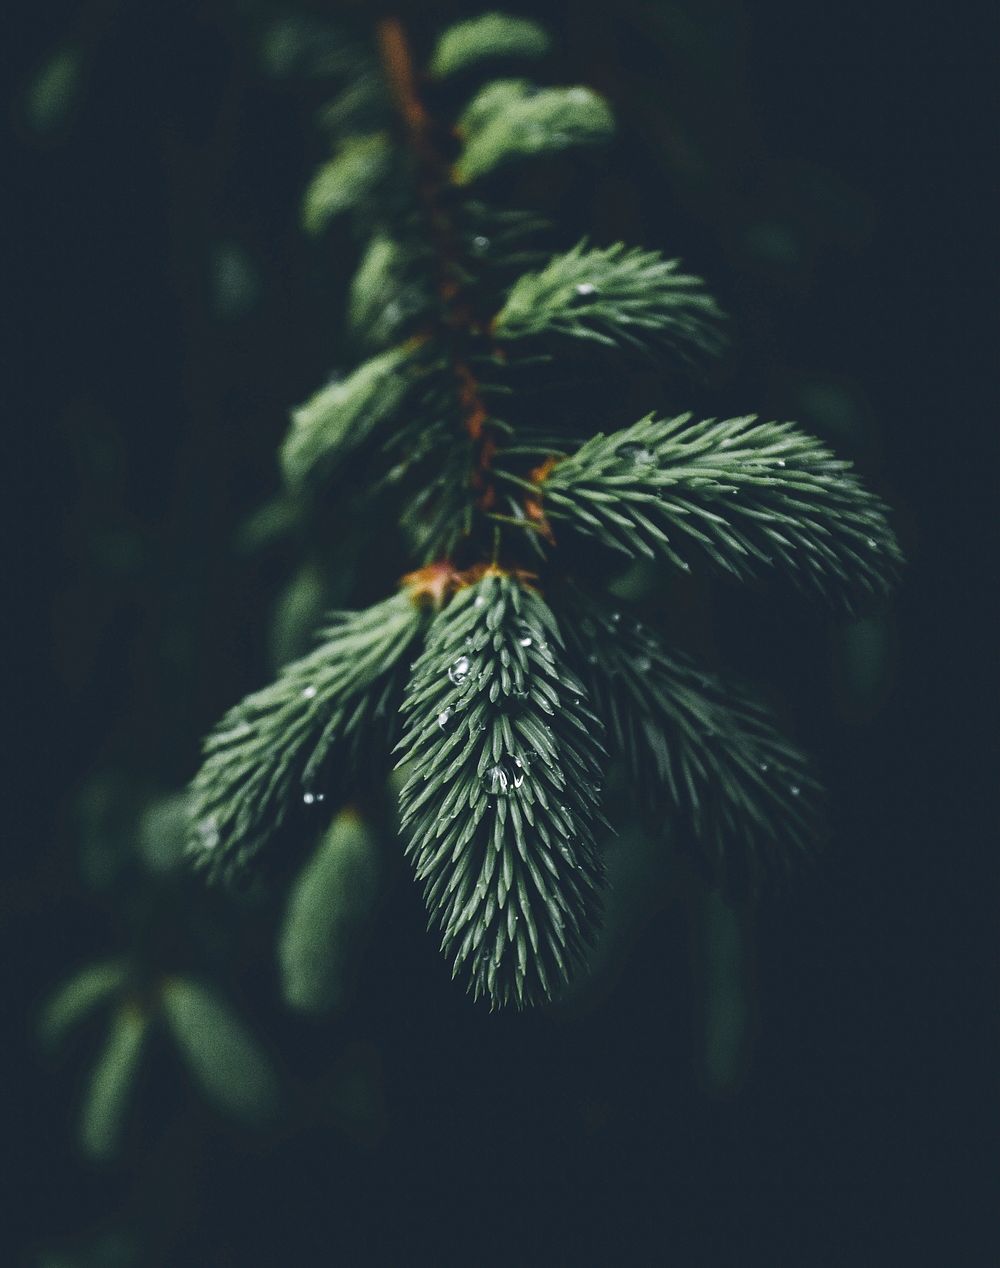 Conifer leaves. Original public domain image from Wikimedia Commons